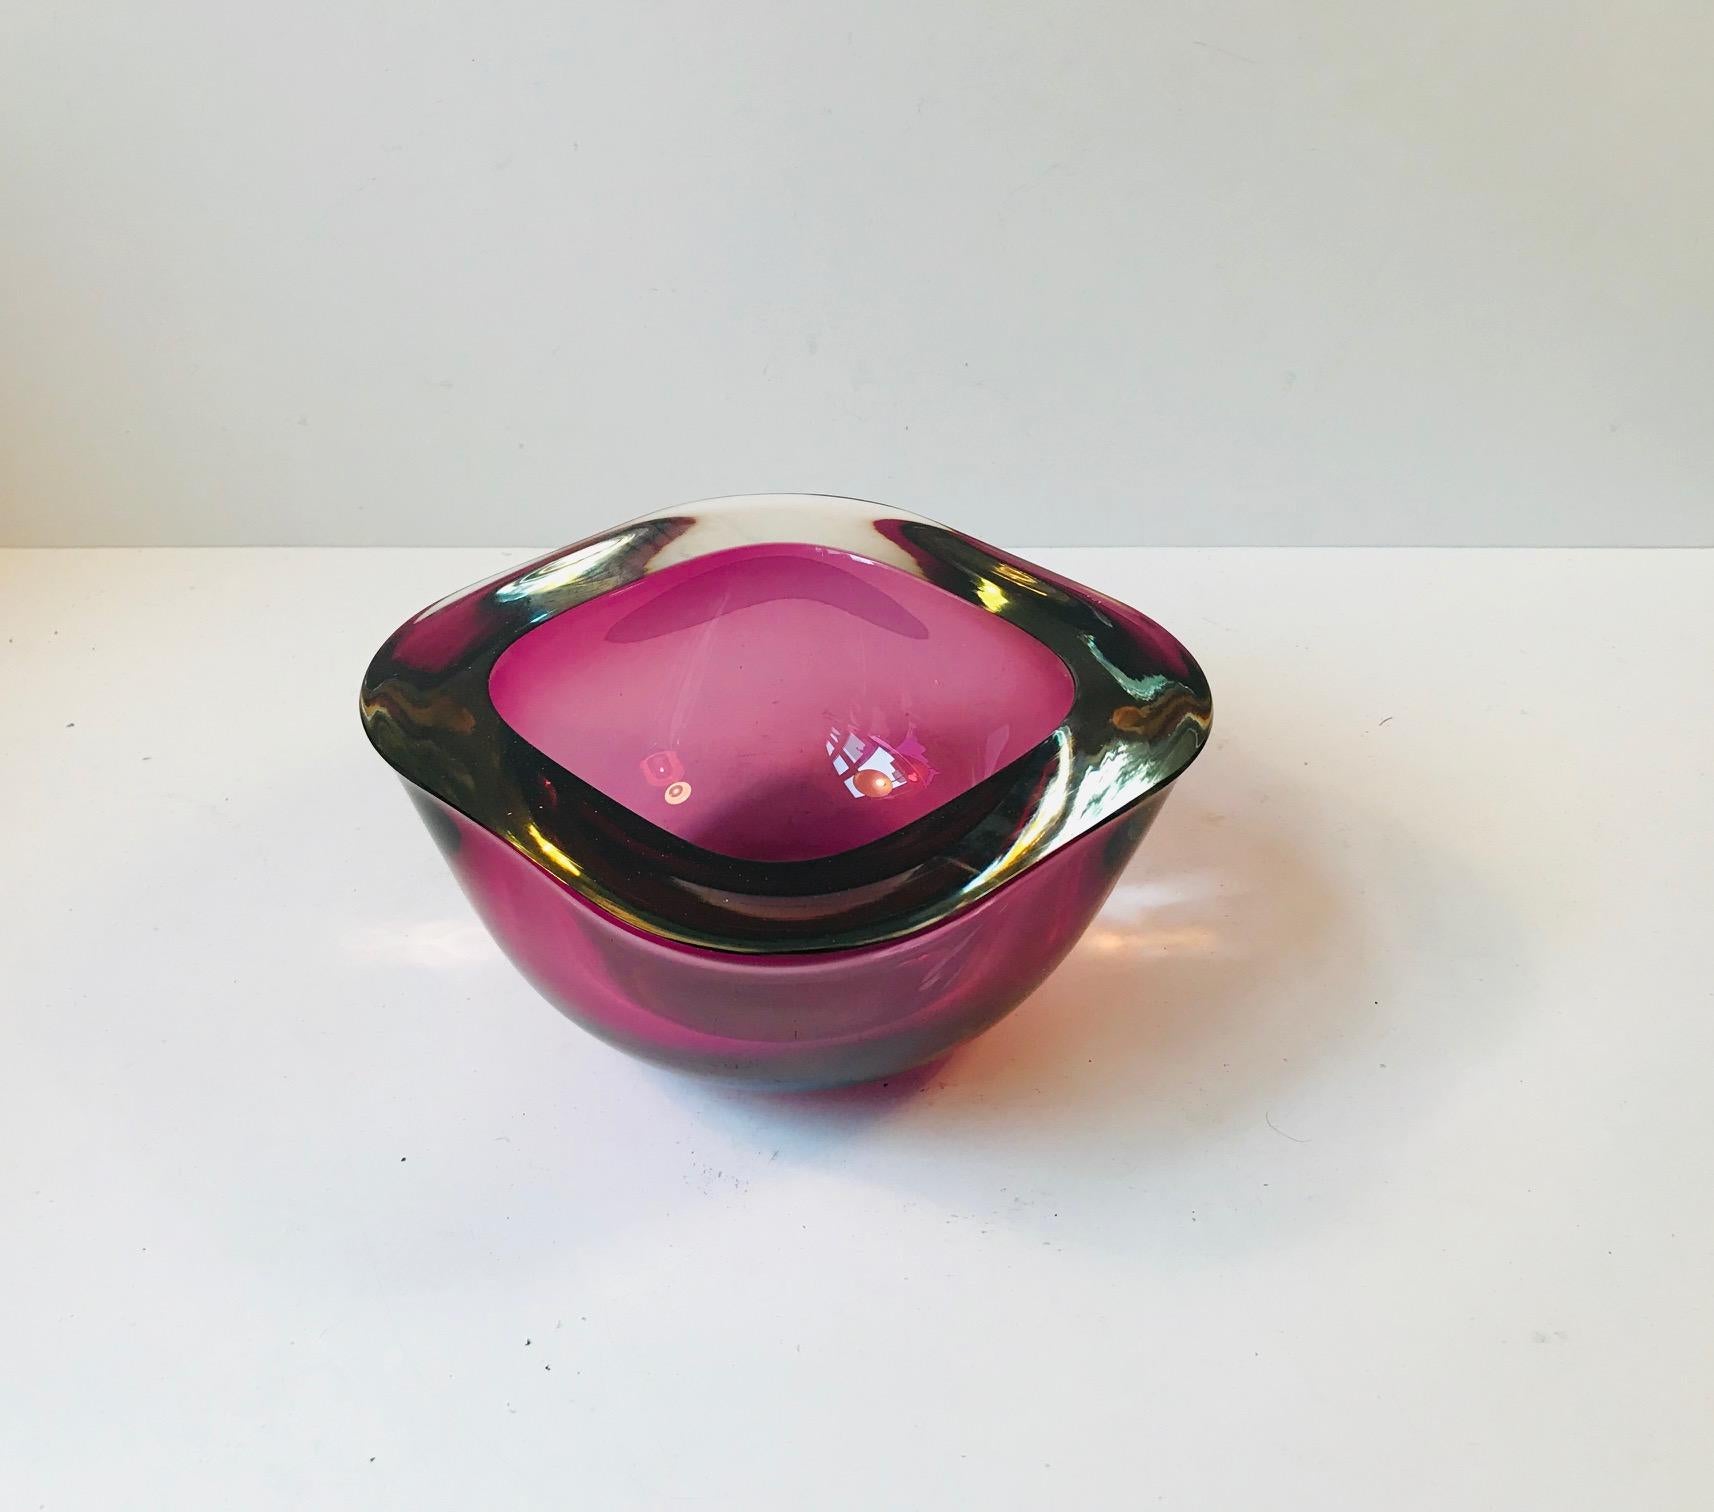 This heavy and thick decorative bowl is composed of purple cased Sommerso glass. It was designed by Flavio Poli in Murano, Italy, during the 1960s. Measures: Diameter 19 cm (7.5 inch).